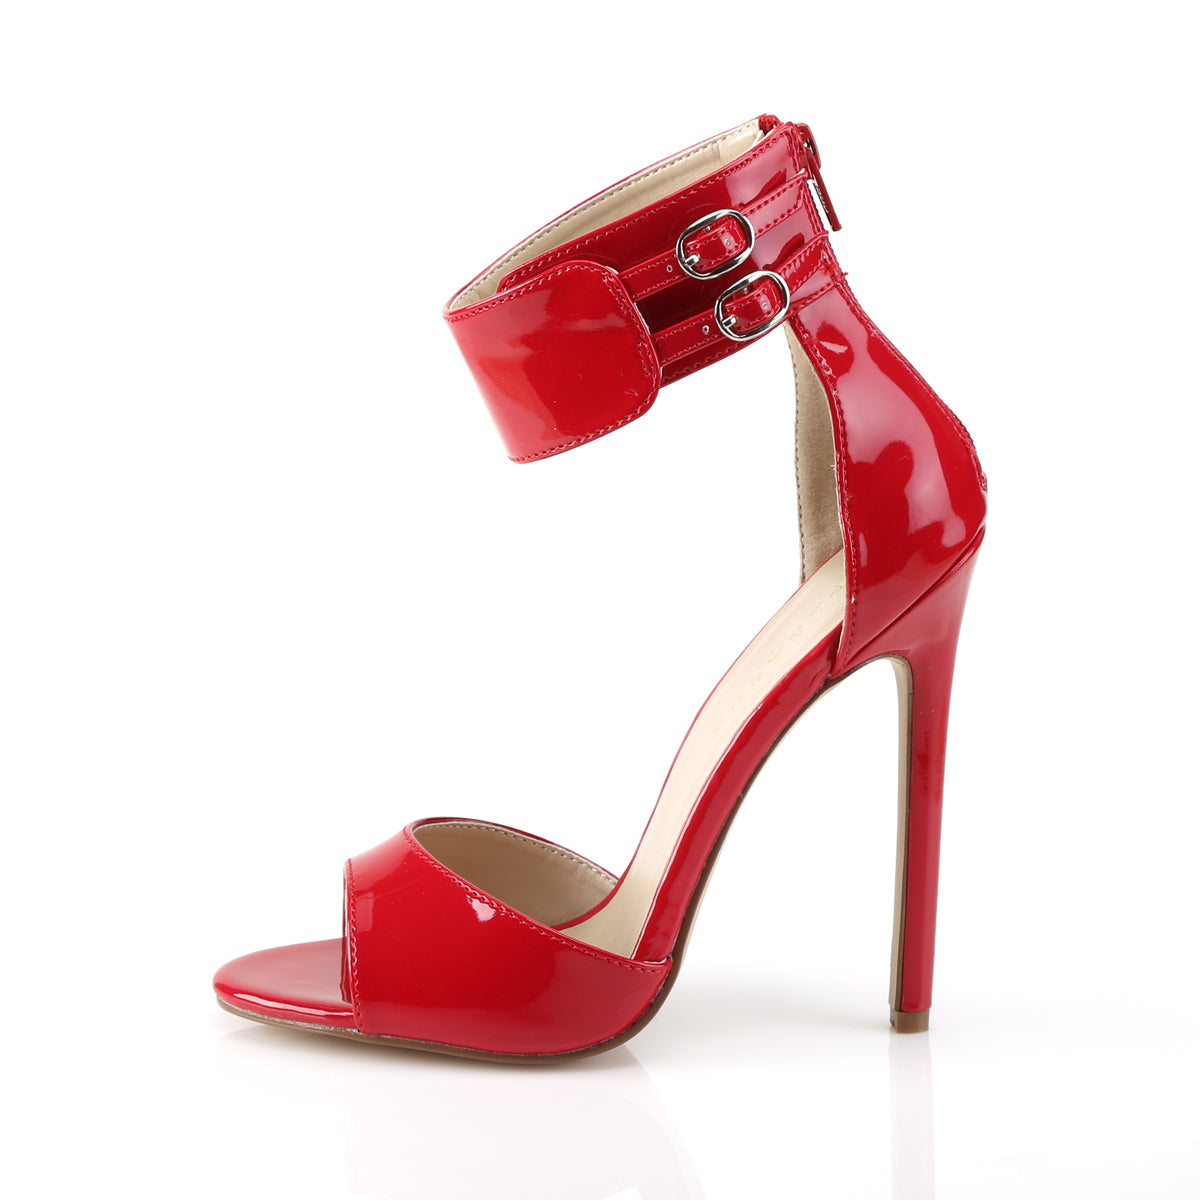 Dual Buckled Ankle Strap Sandals Red